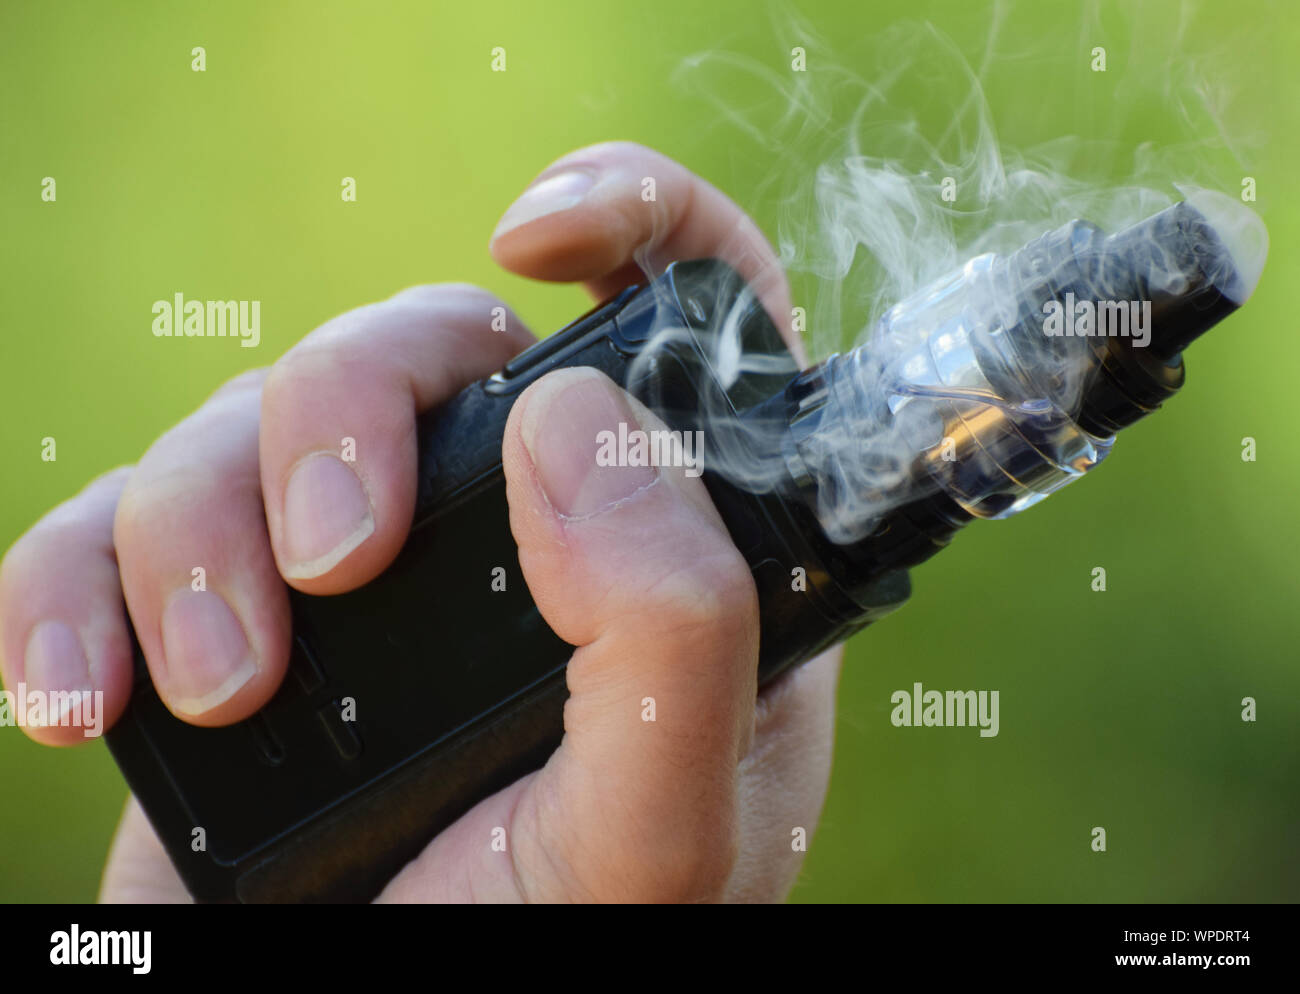 An E Cigarette / Mod in the hand of a man vaping close up photo Stock Photo